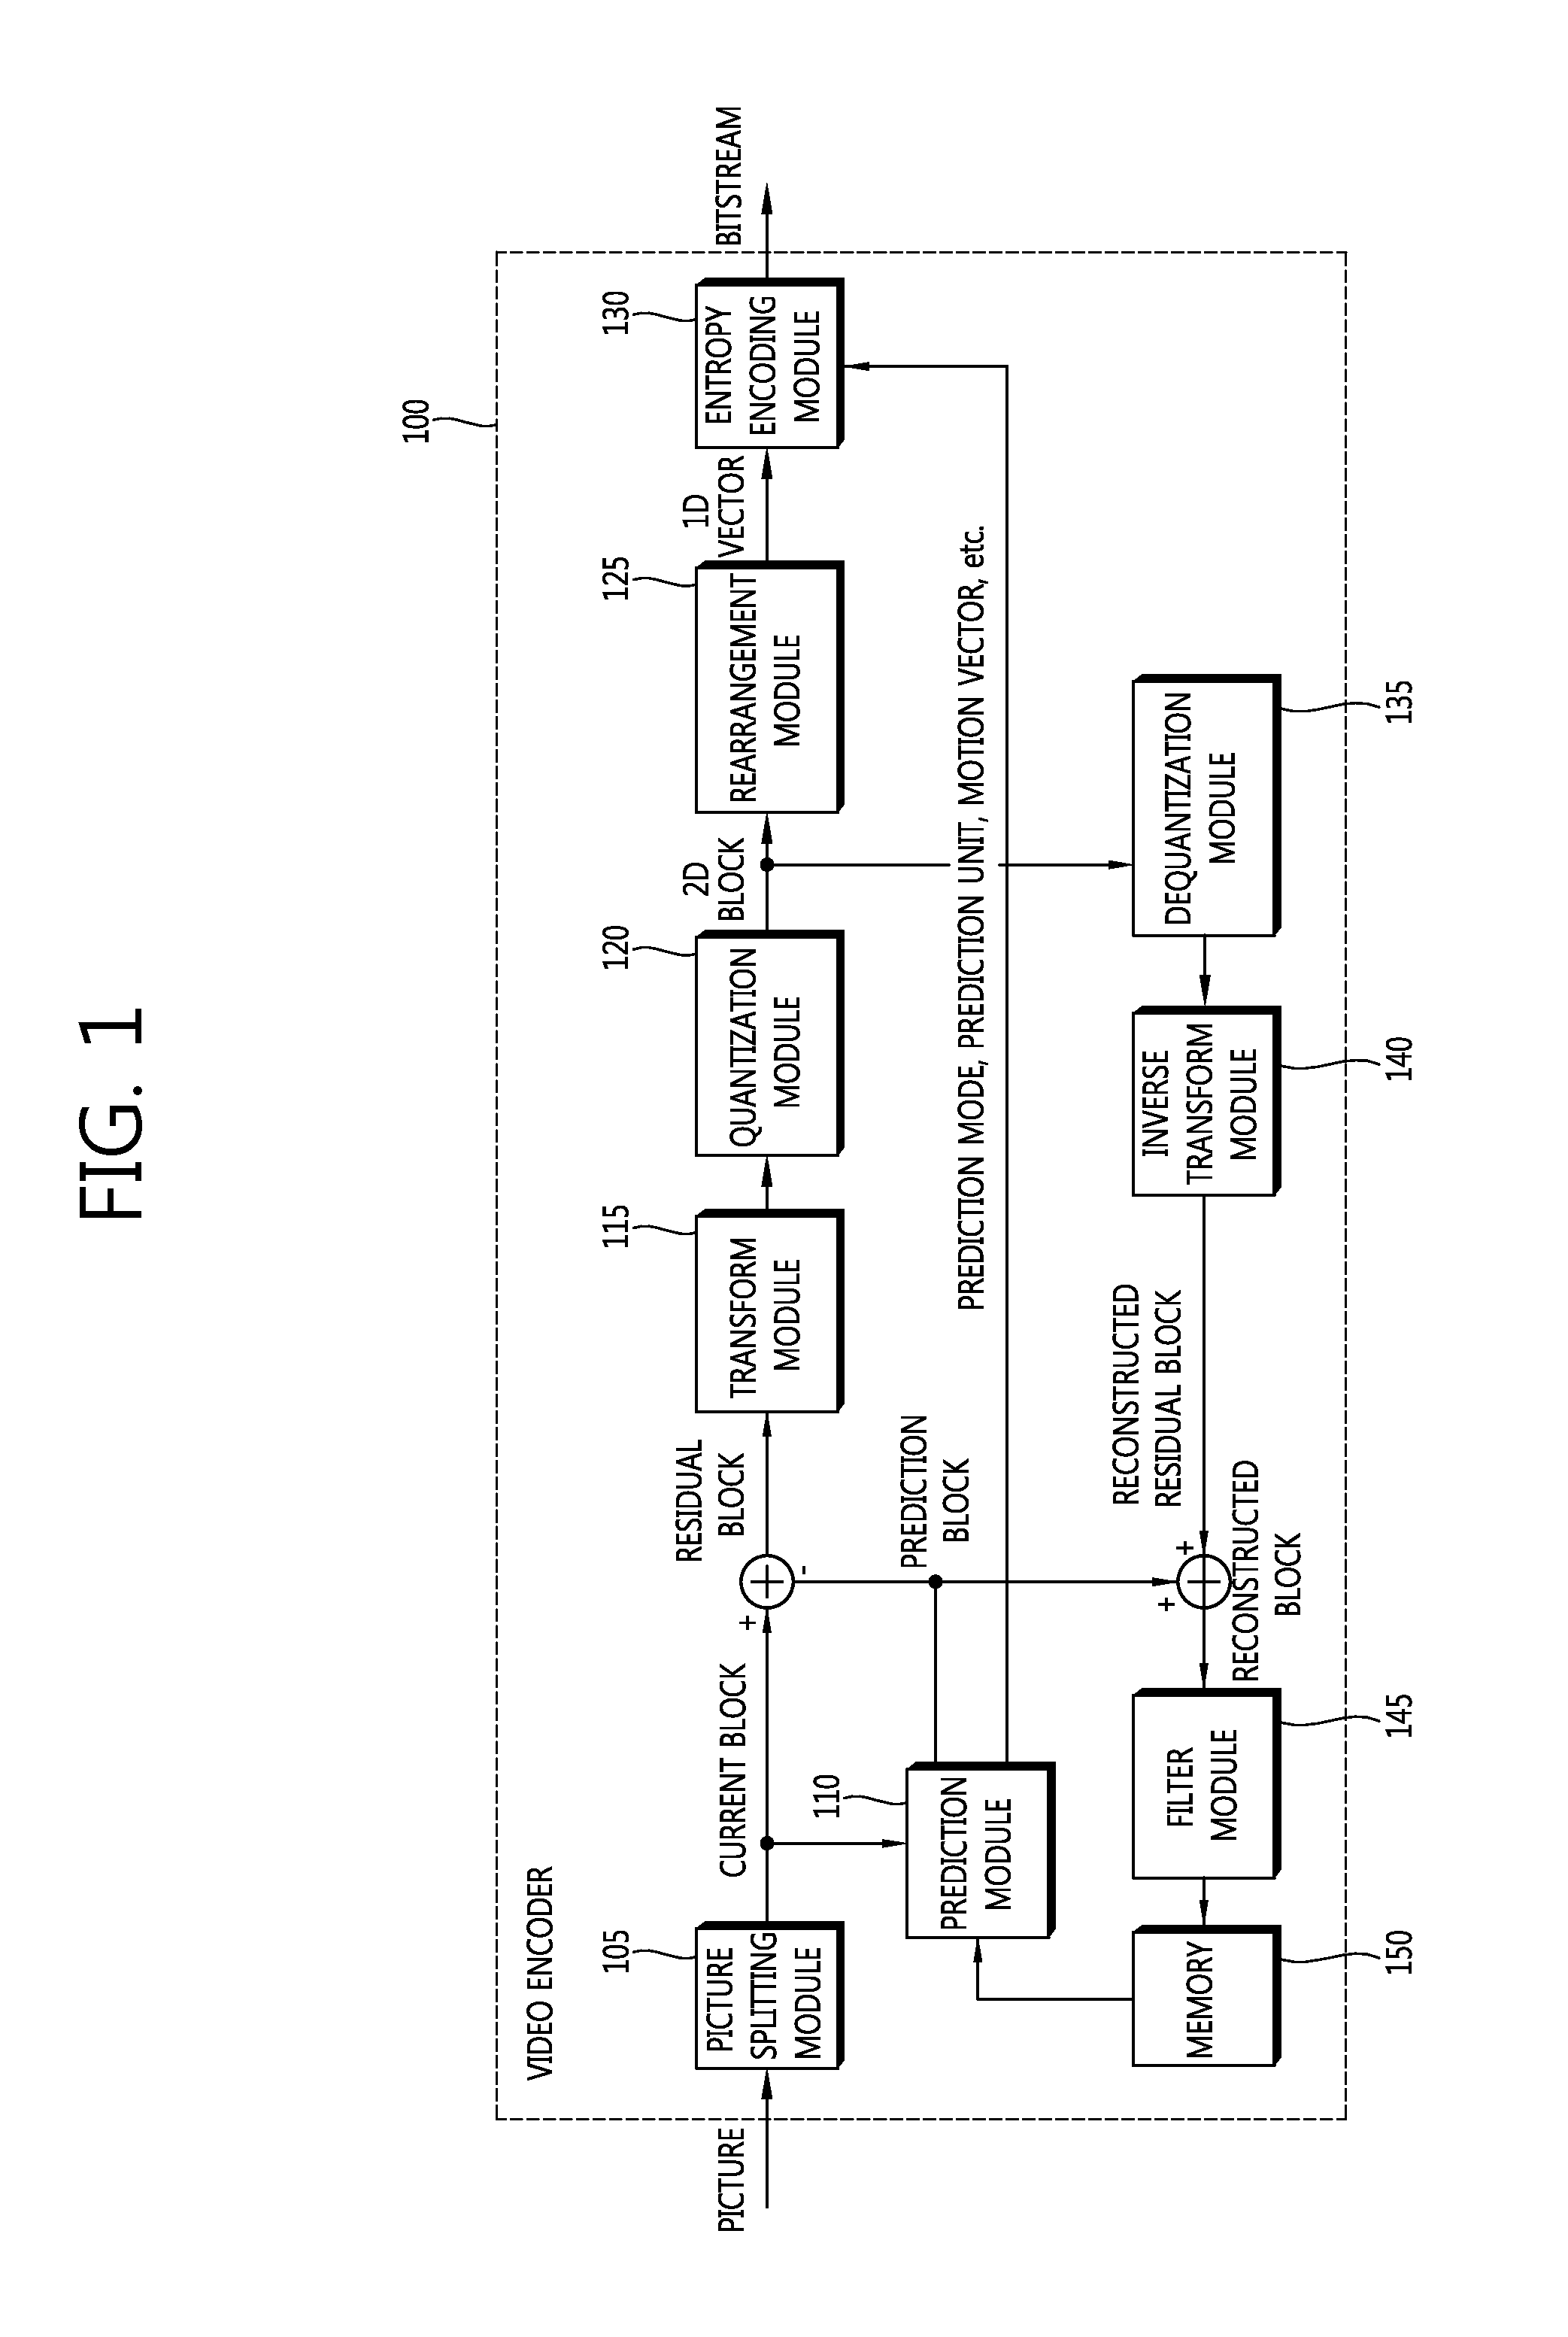 Method and apparatus for signaling image information, and decoding method and apparatus using same